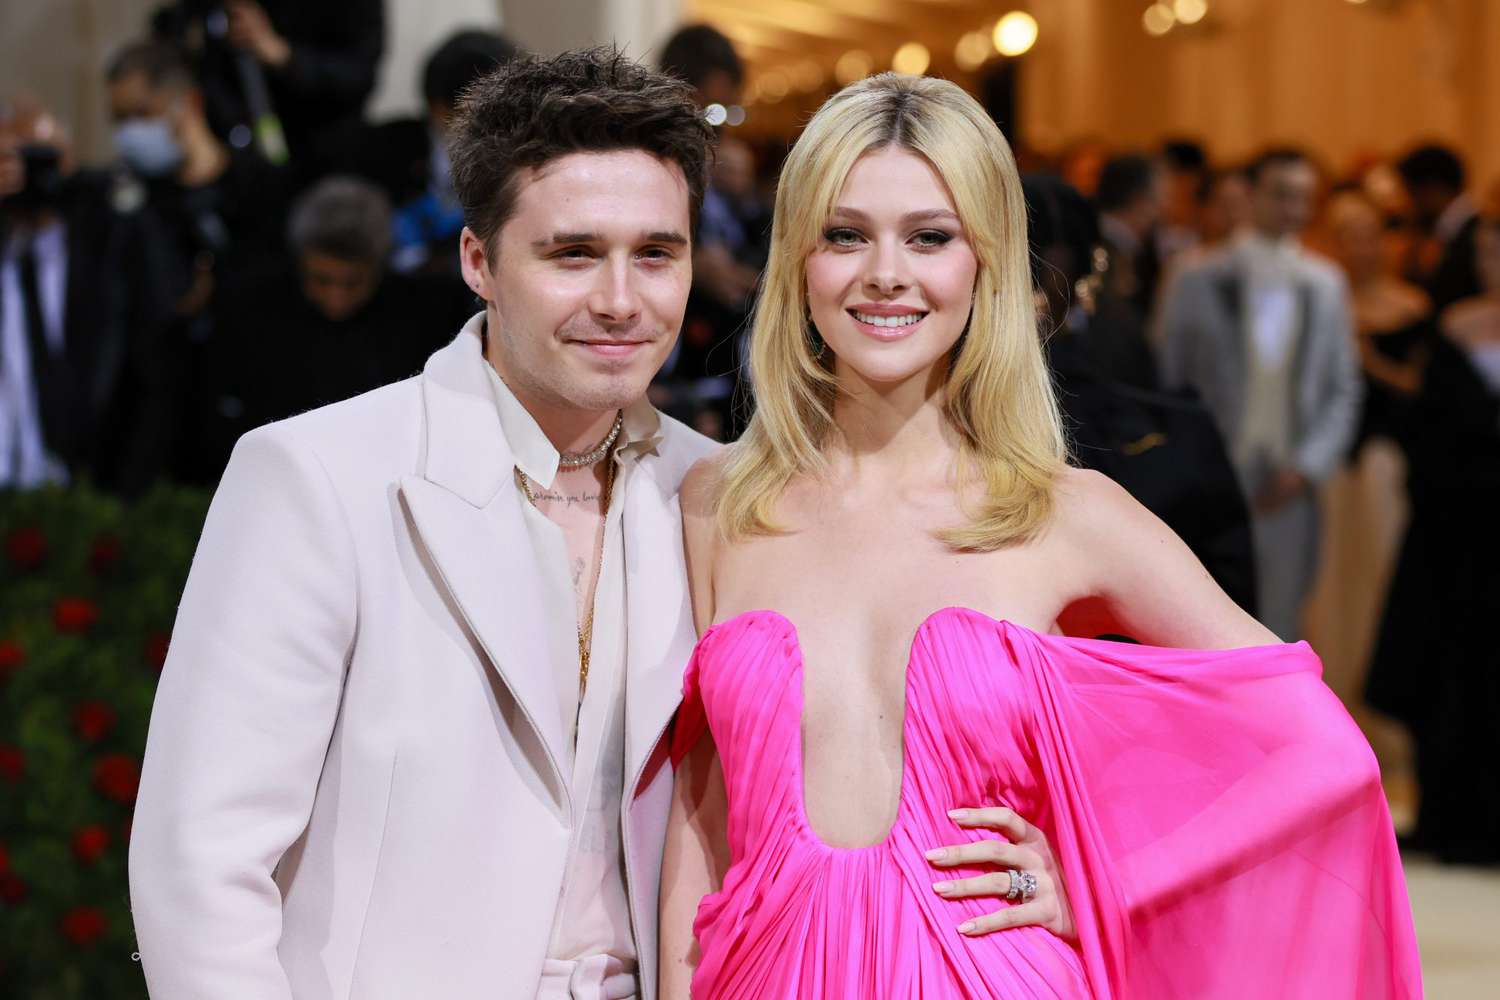 Brooklyn Beckham and Nicola Peltz at The 2022 Met Gala Celebrating "In America: An Anthology of Fashion"